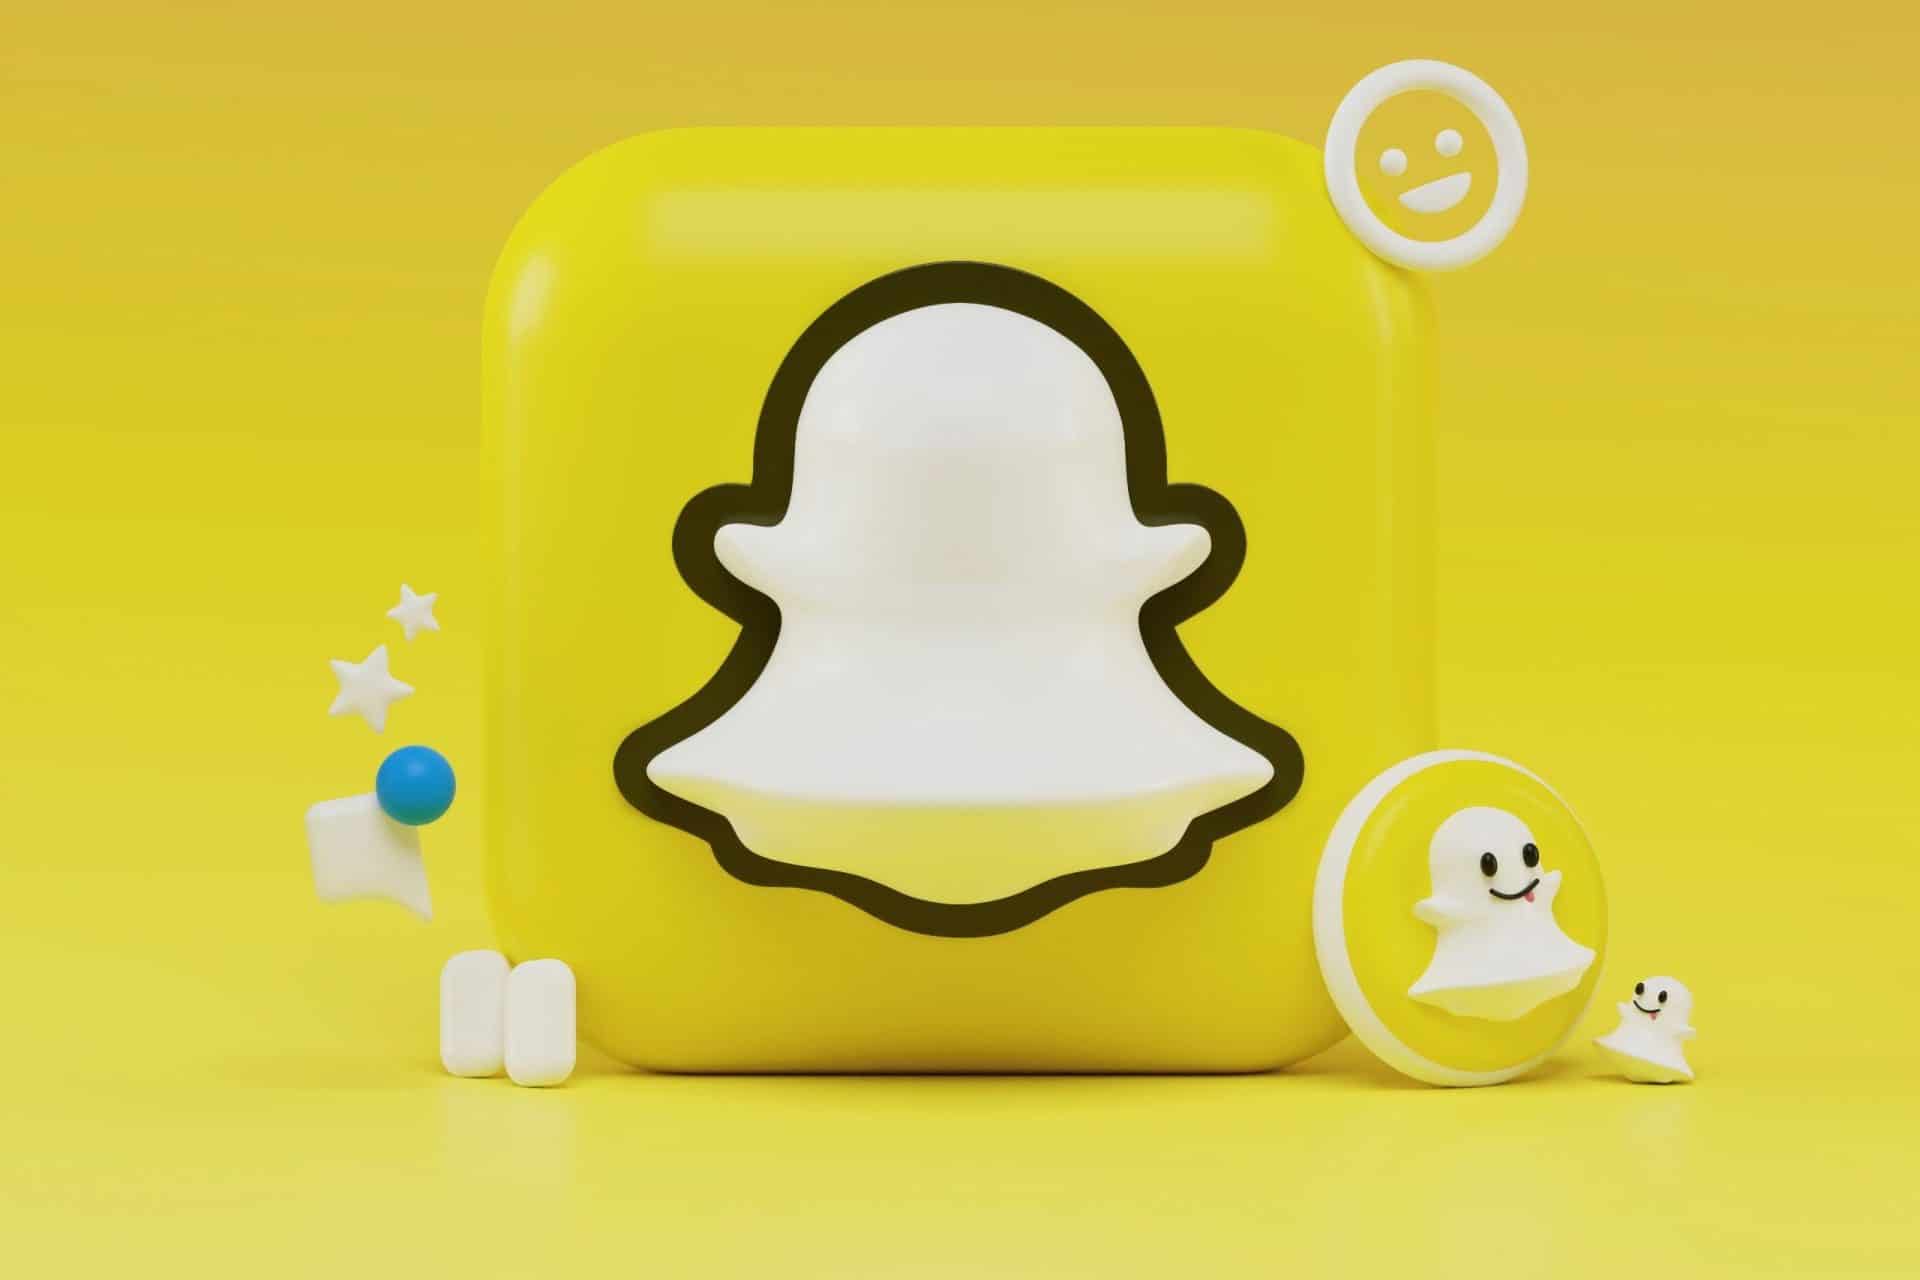 How to make money on Snapchat